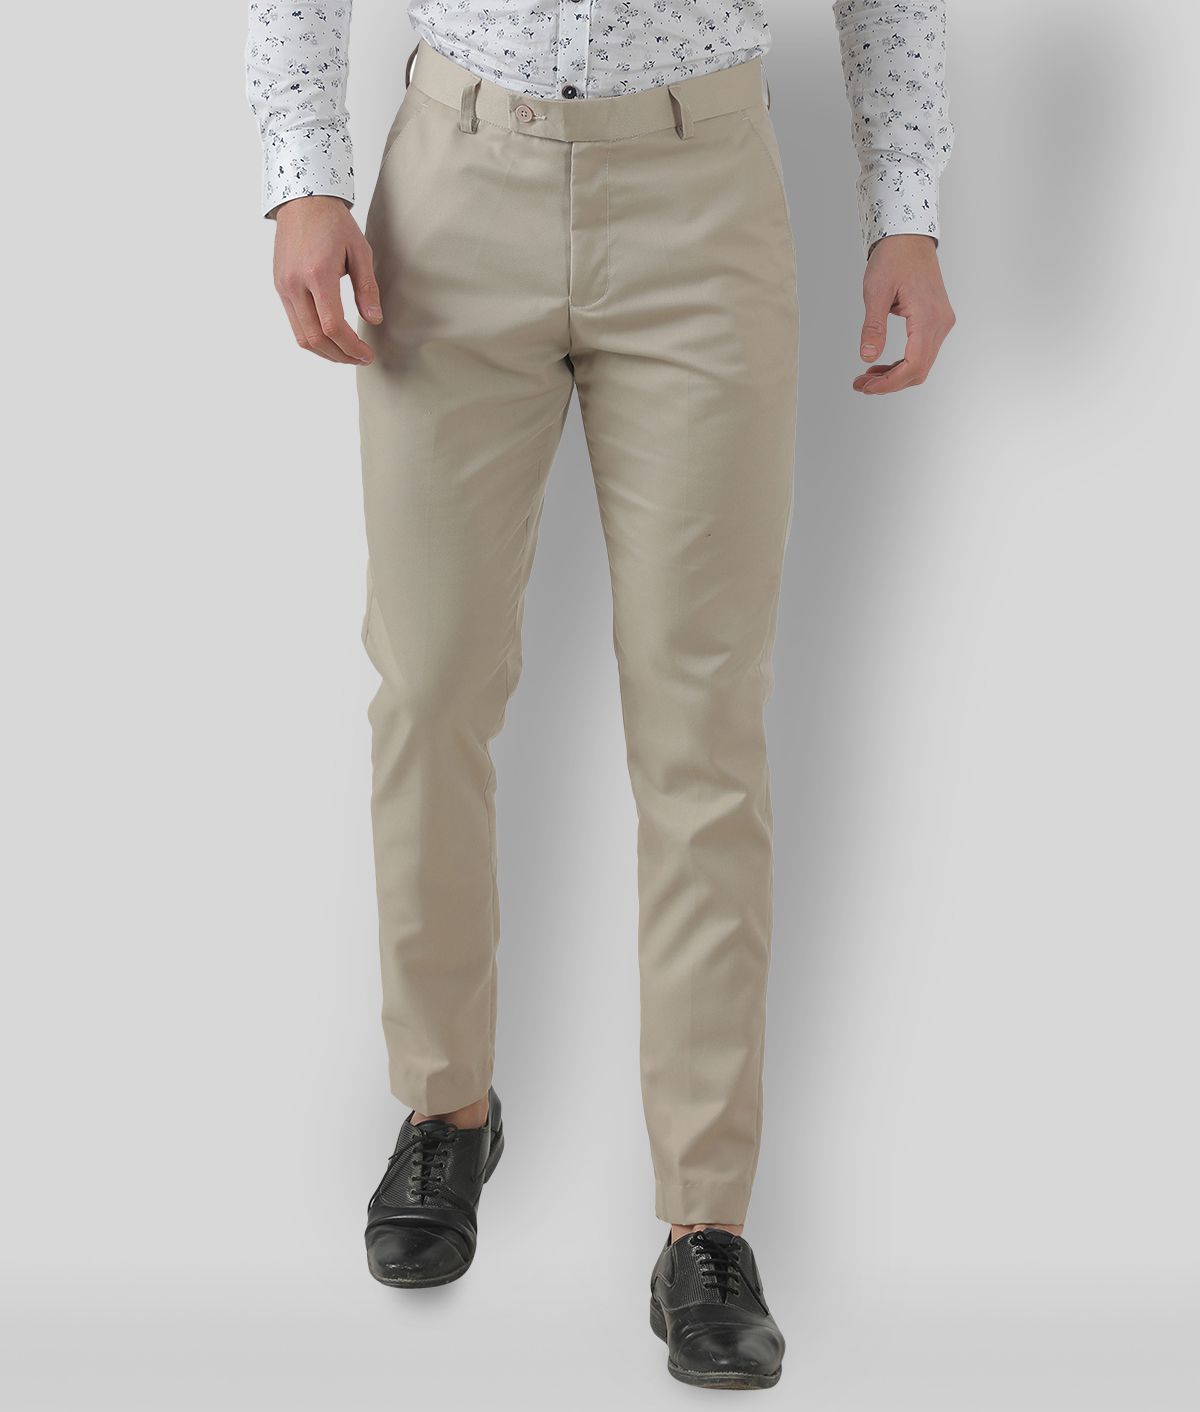     			Inspire Clothing Inspiration - Beige Polycotton Slim - Fit Men's Formal Pants ( Pack of 1 )